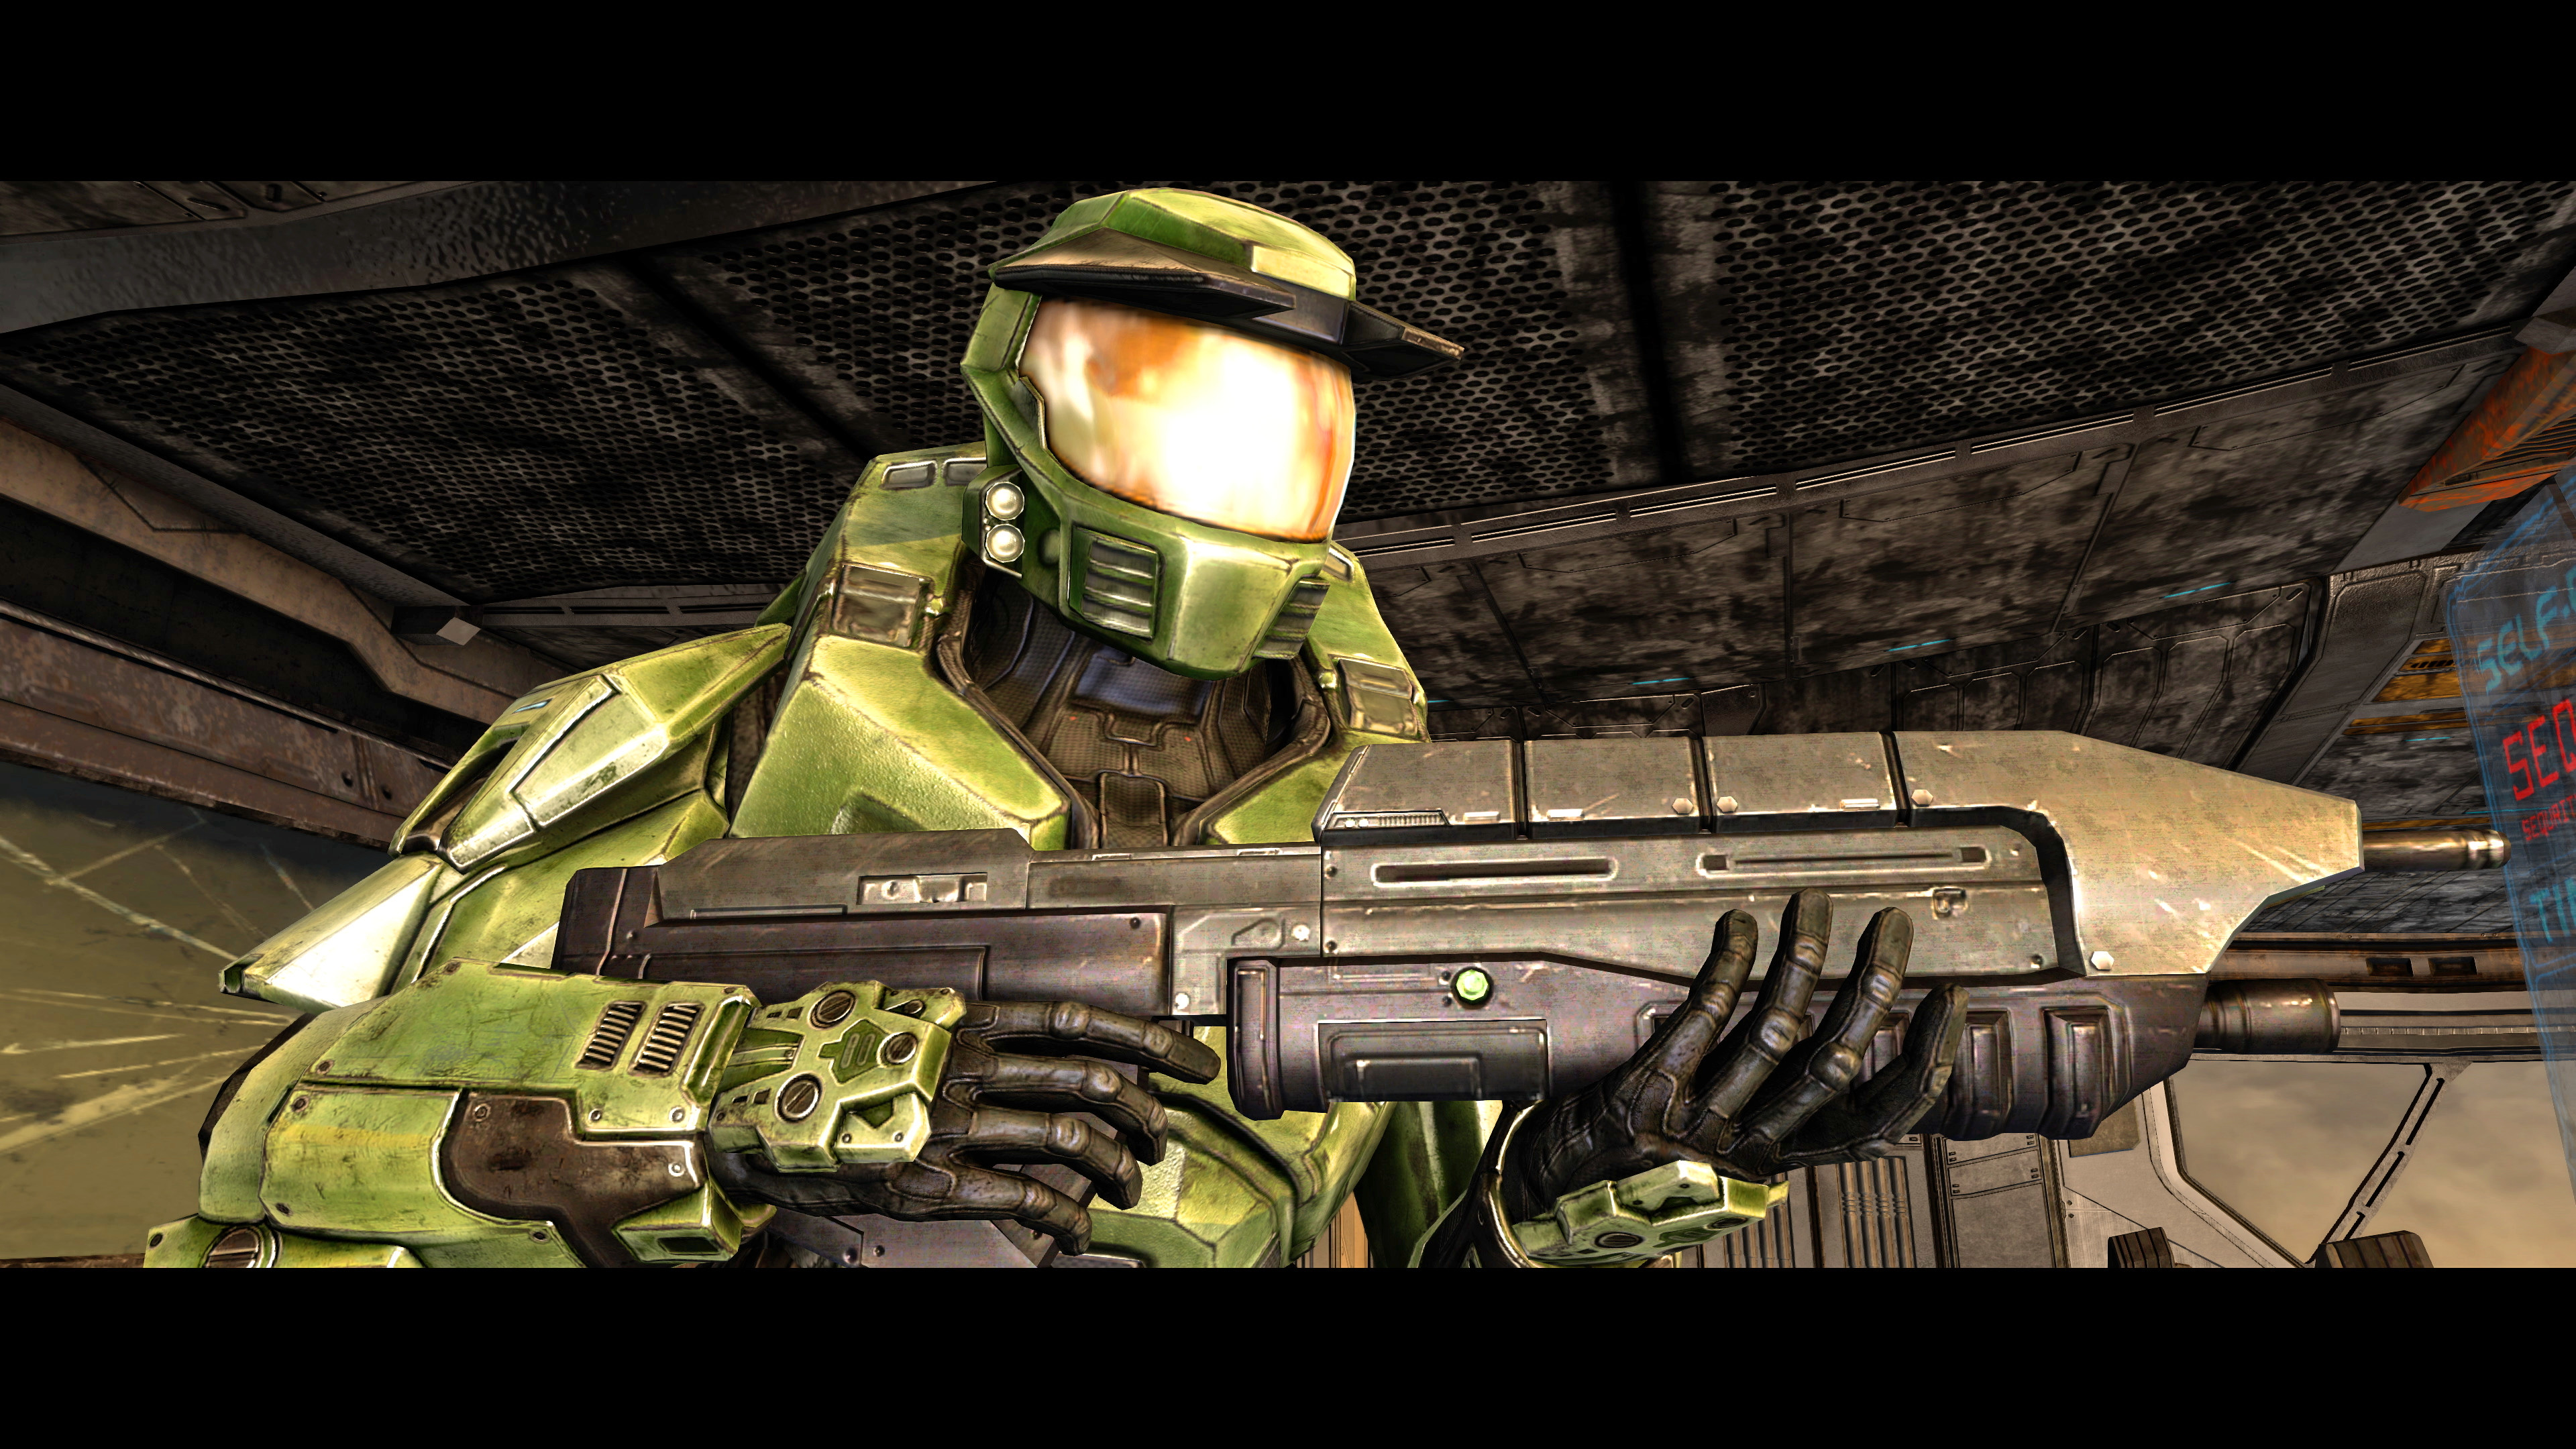 Media asset in full size related to 3dfxzone.it news item entitled as follows: Microsoft rilascia Halo: Combat Evolved Anniversary in edizione per PC | Image Name: news30518_Halo-Combat-Evolved-Anniversary-Screenshot_3.jpg